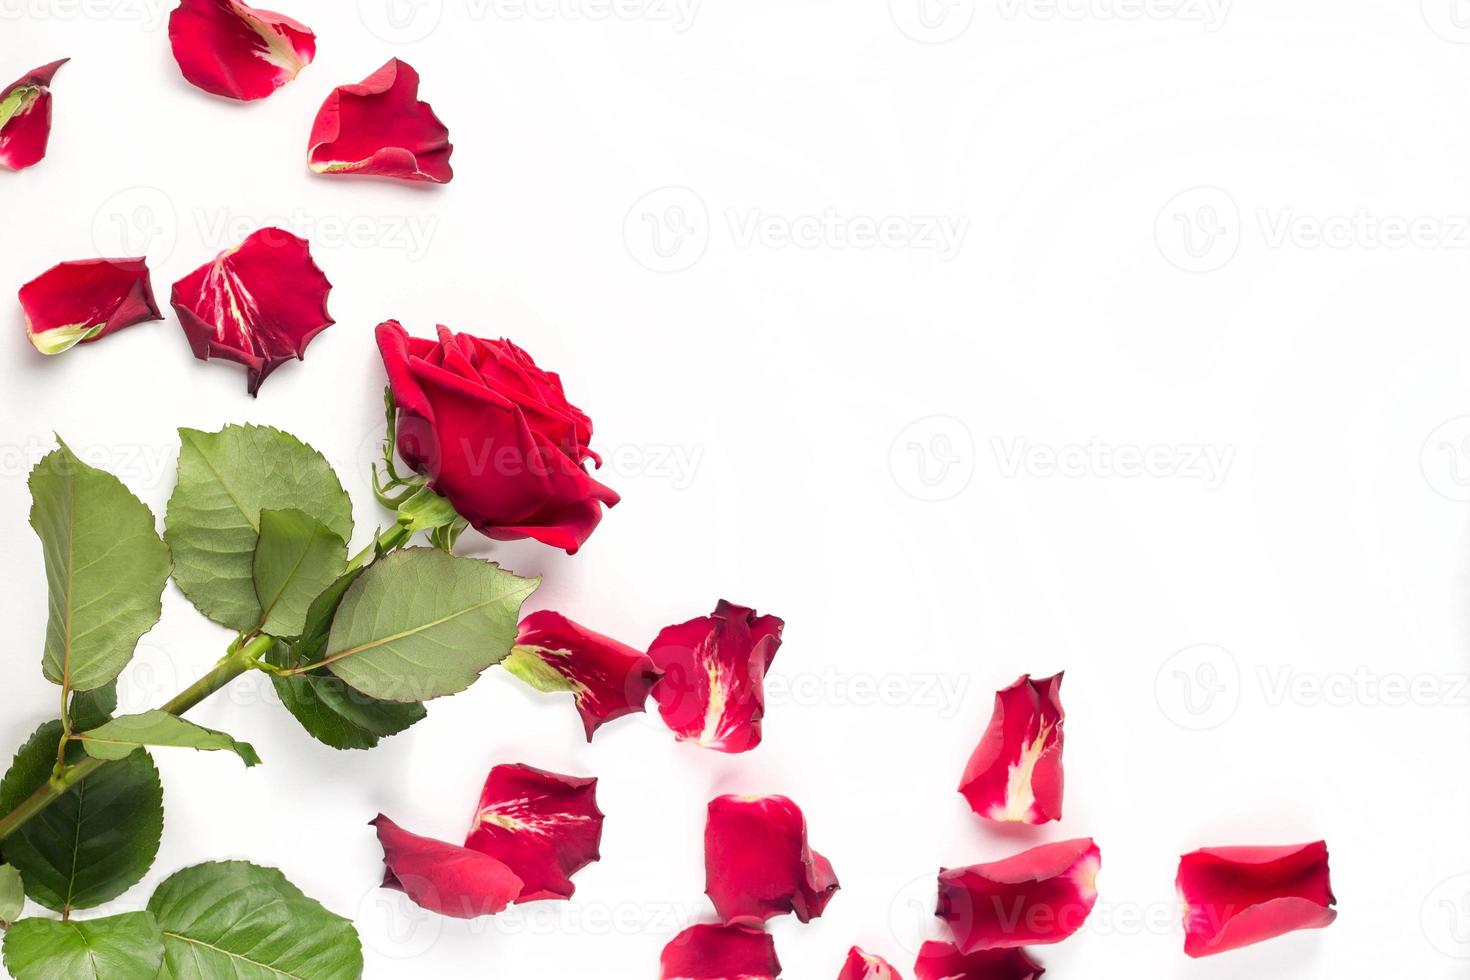 Red roses and rose petals isolated on white photo